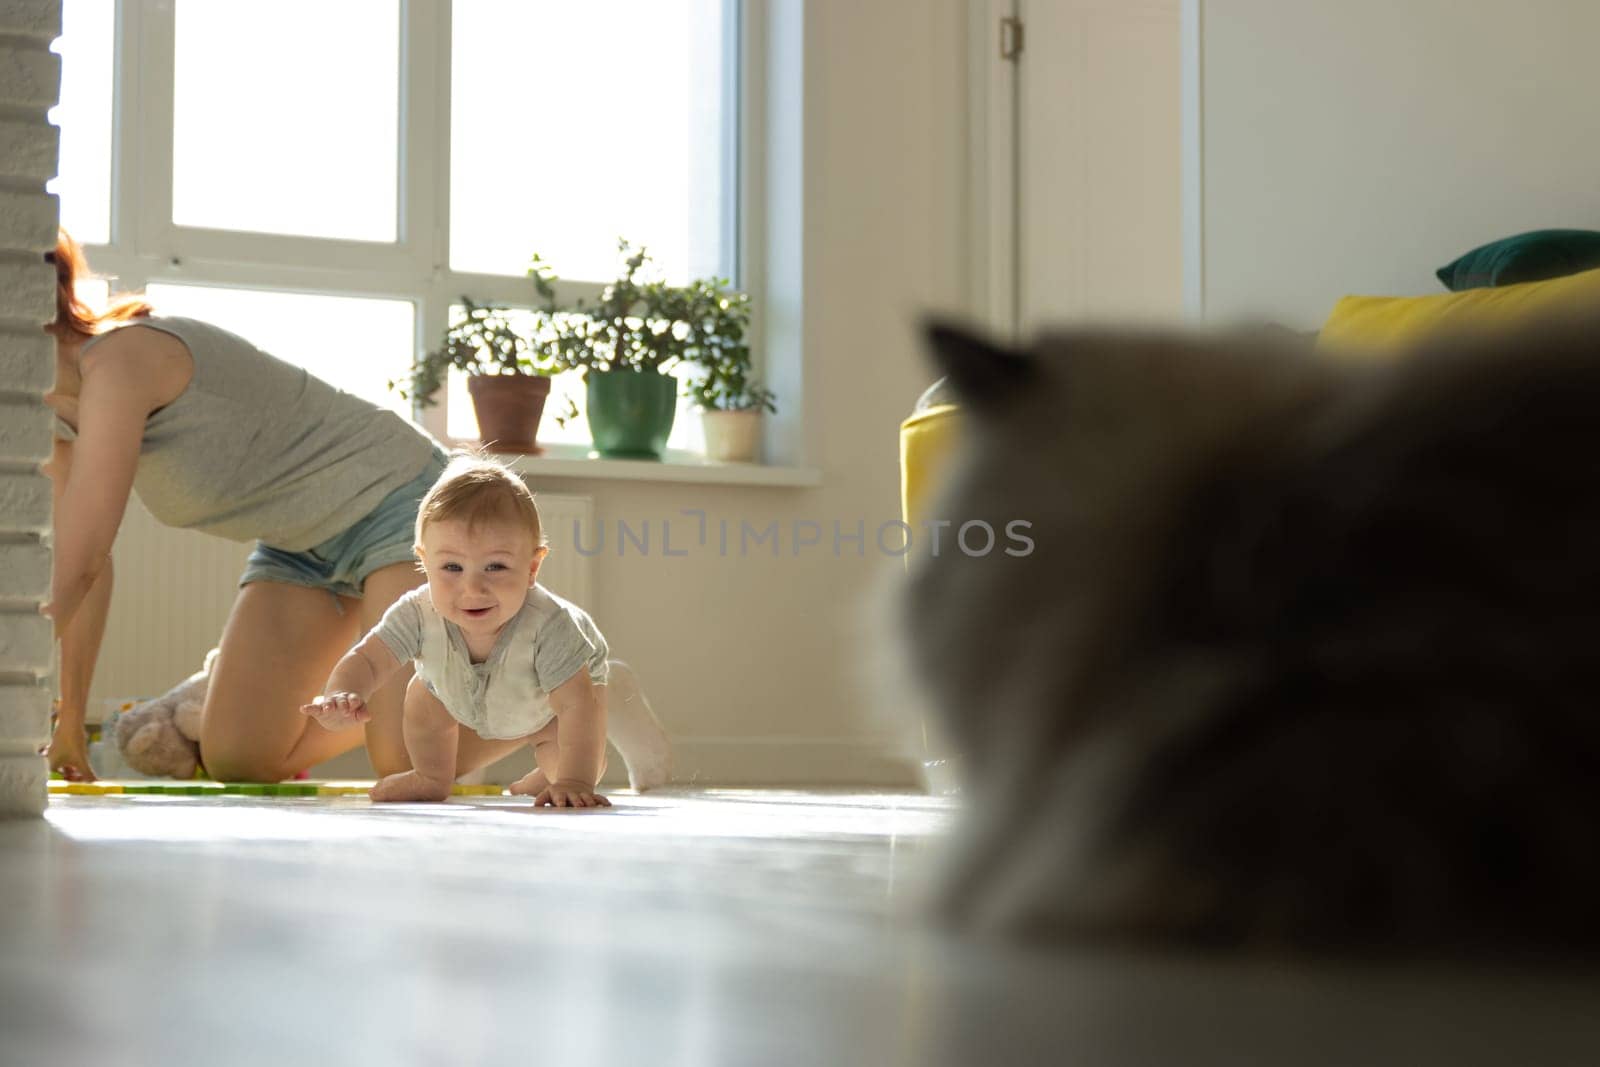 A baby crawling on the floor next to a cat